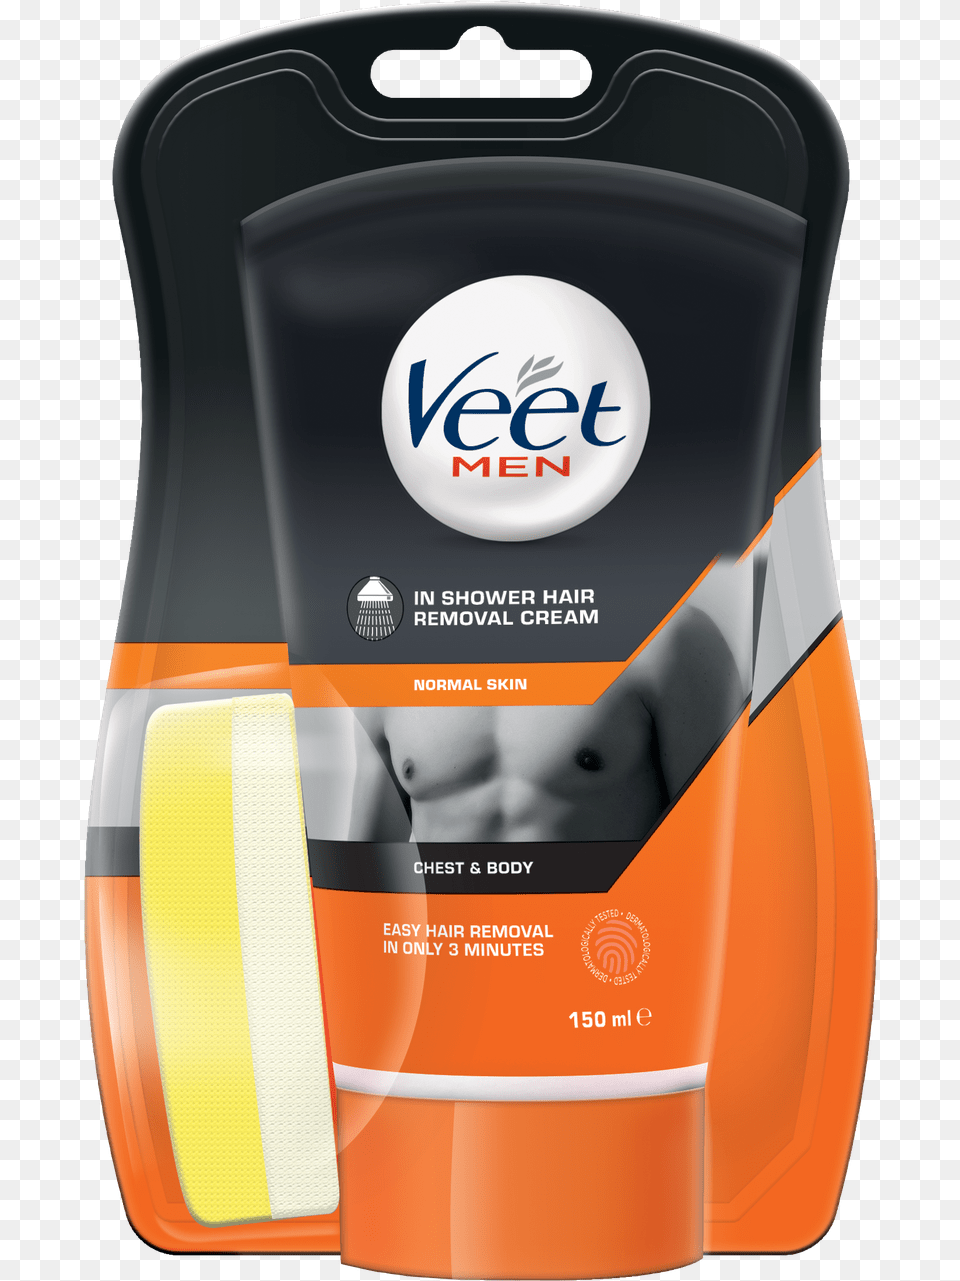 Precision Wax Ampamp Veet Men Hair Removal Cream, Bottle, Cosmetics, Adult, Male Png